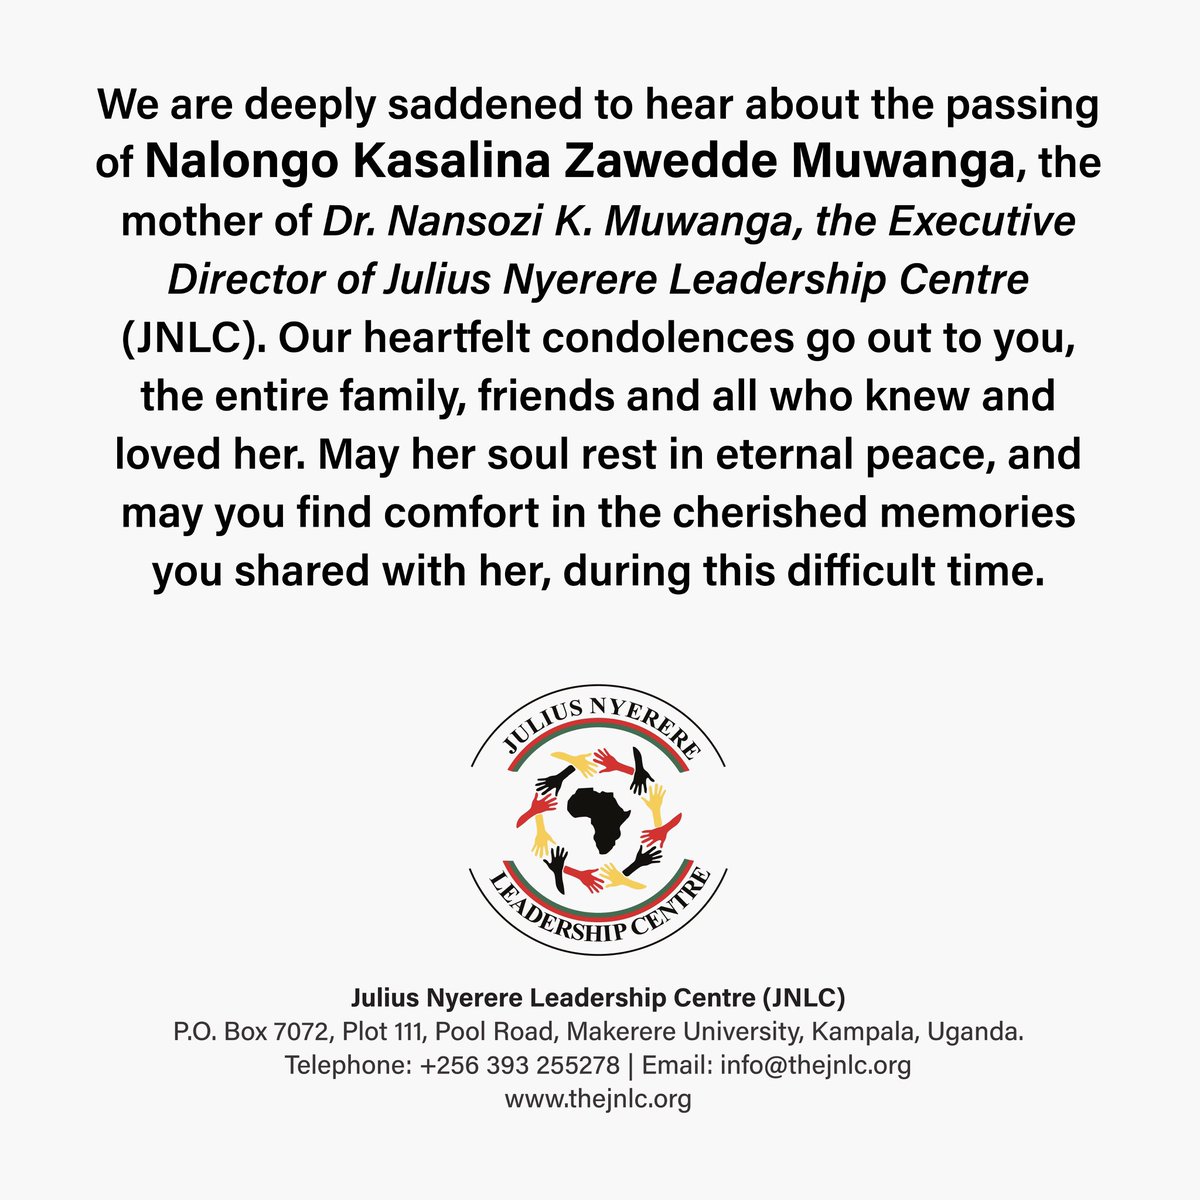 Our heartfelt condolences go out to you @NansoziKM, the entire family, friends, and all who knew and loved her. May her soul rest in eternal peace.